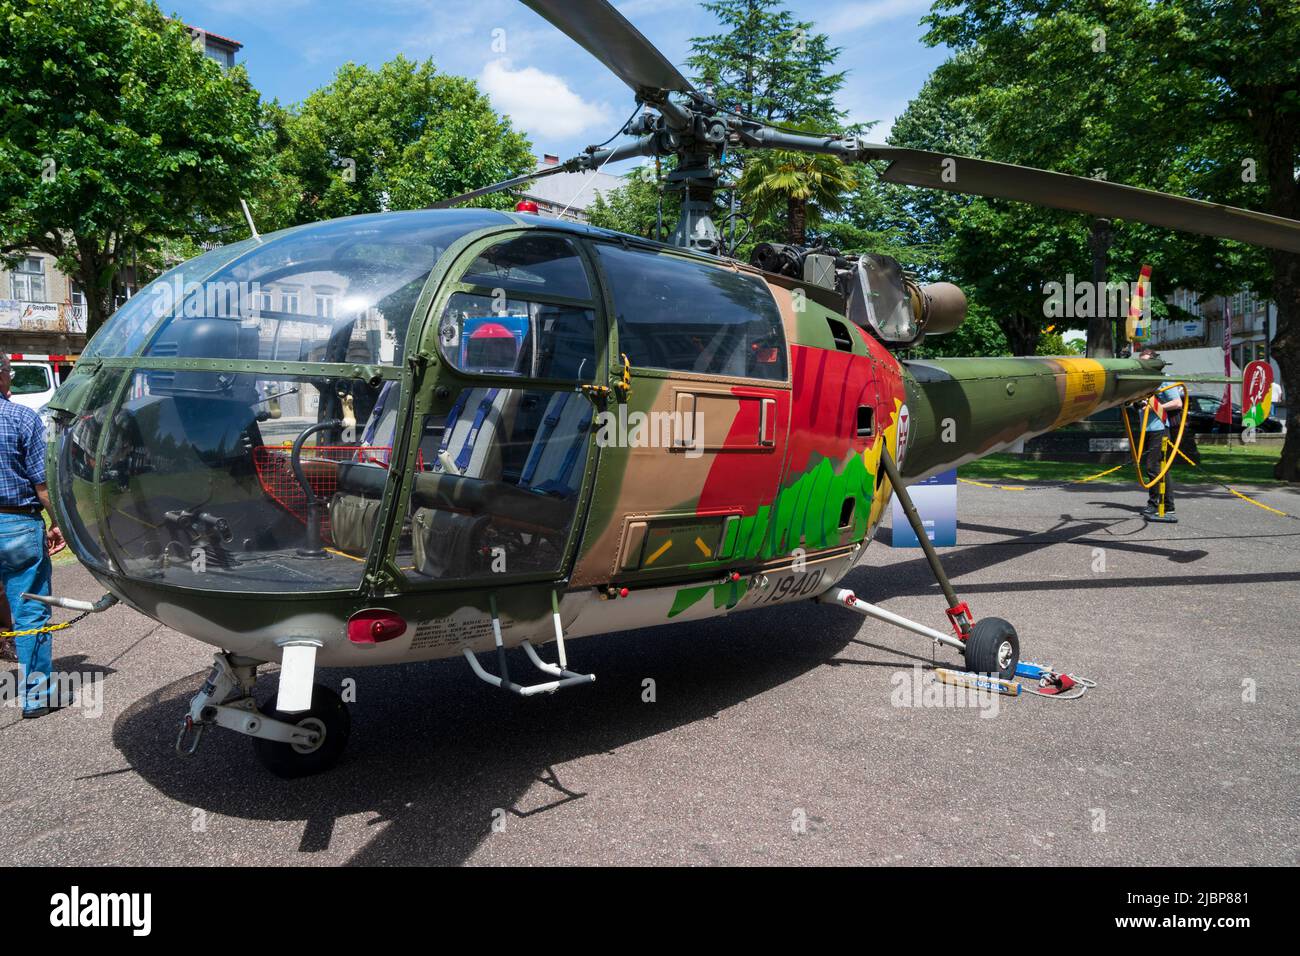 Portuguese Air Force, helicopter SE 3160 Alouette III. Helicopter Flight. Portuguese Air Fore Airline Helicopter. Guerra Colonial Stock Photo